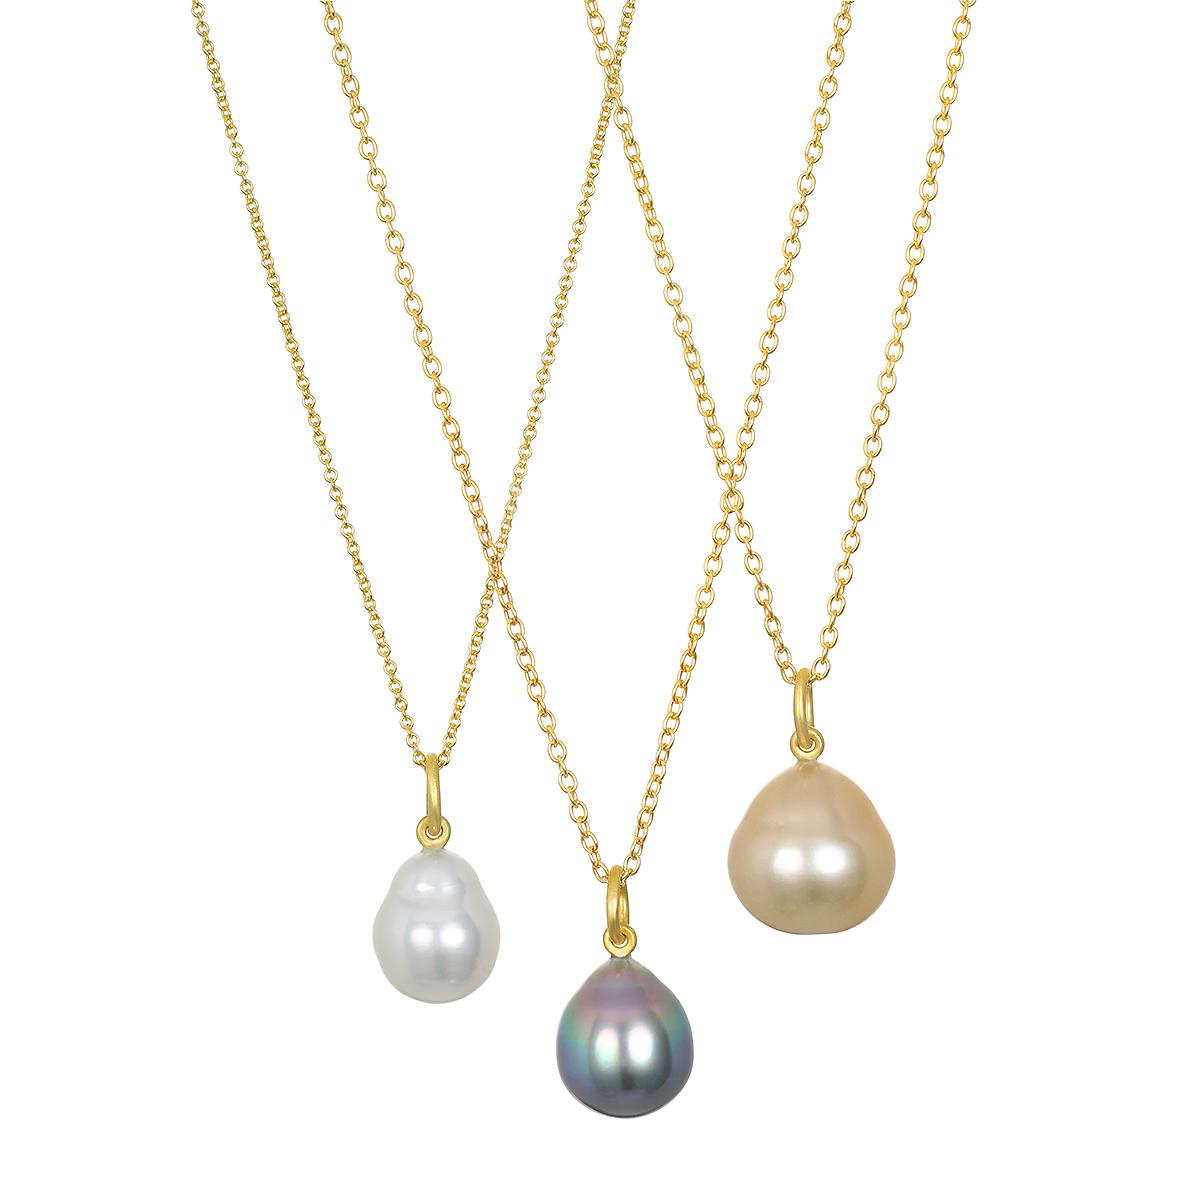 This beautiful Faye Kim South Sea Pearl Pendant, dropped onto an 18 Karat Gold chain with a classic jump ring bail, is both lustrous and classic. The pendant's modern design conveys understated elegance and a truly stylish, everyday look and is